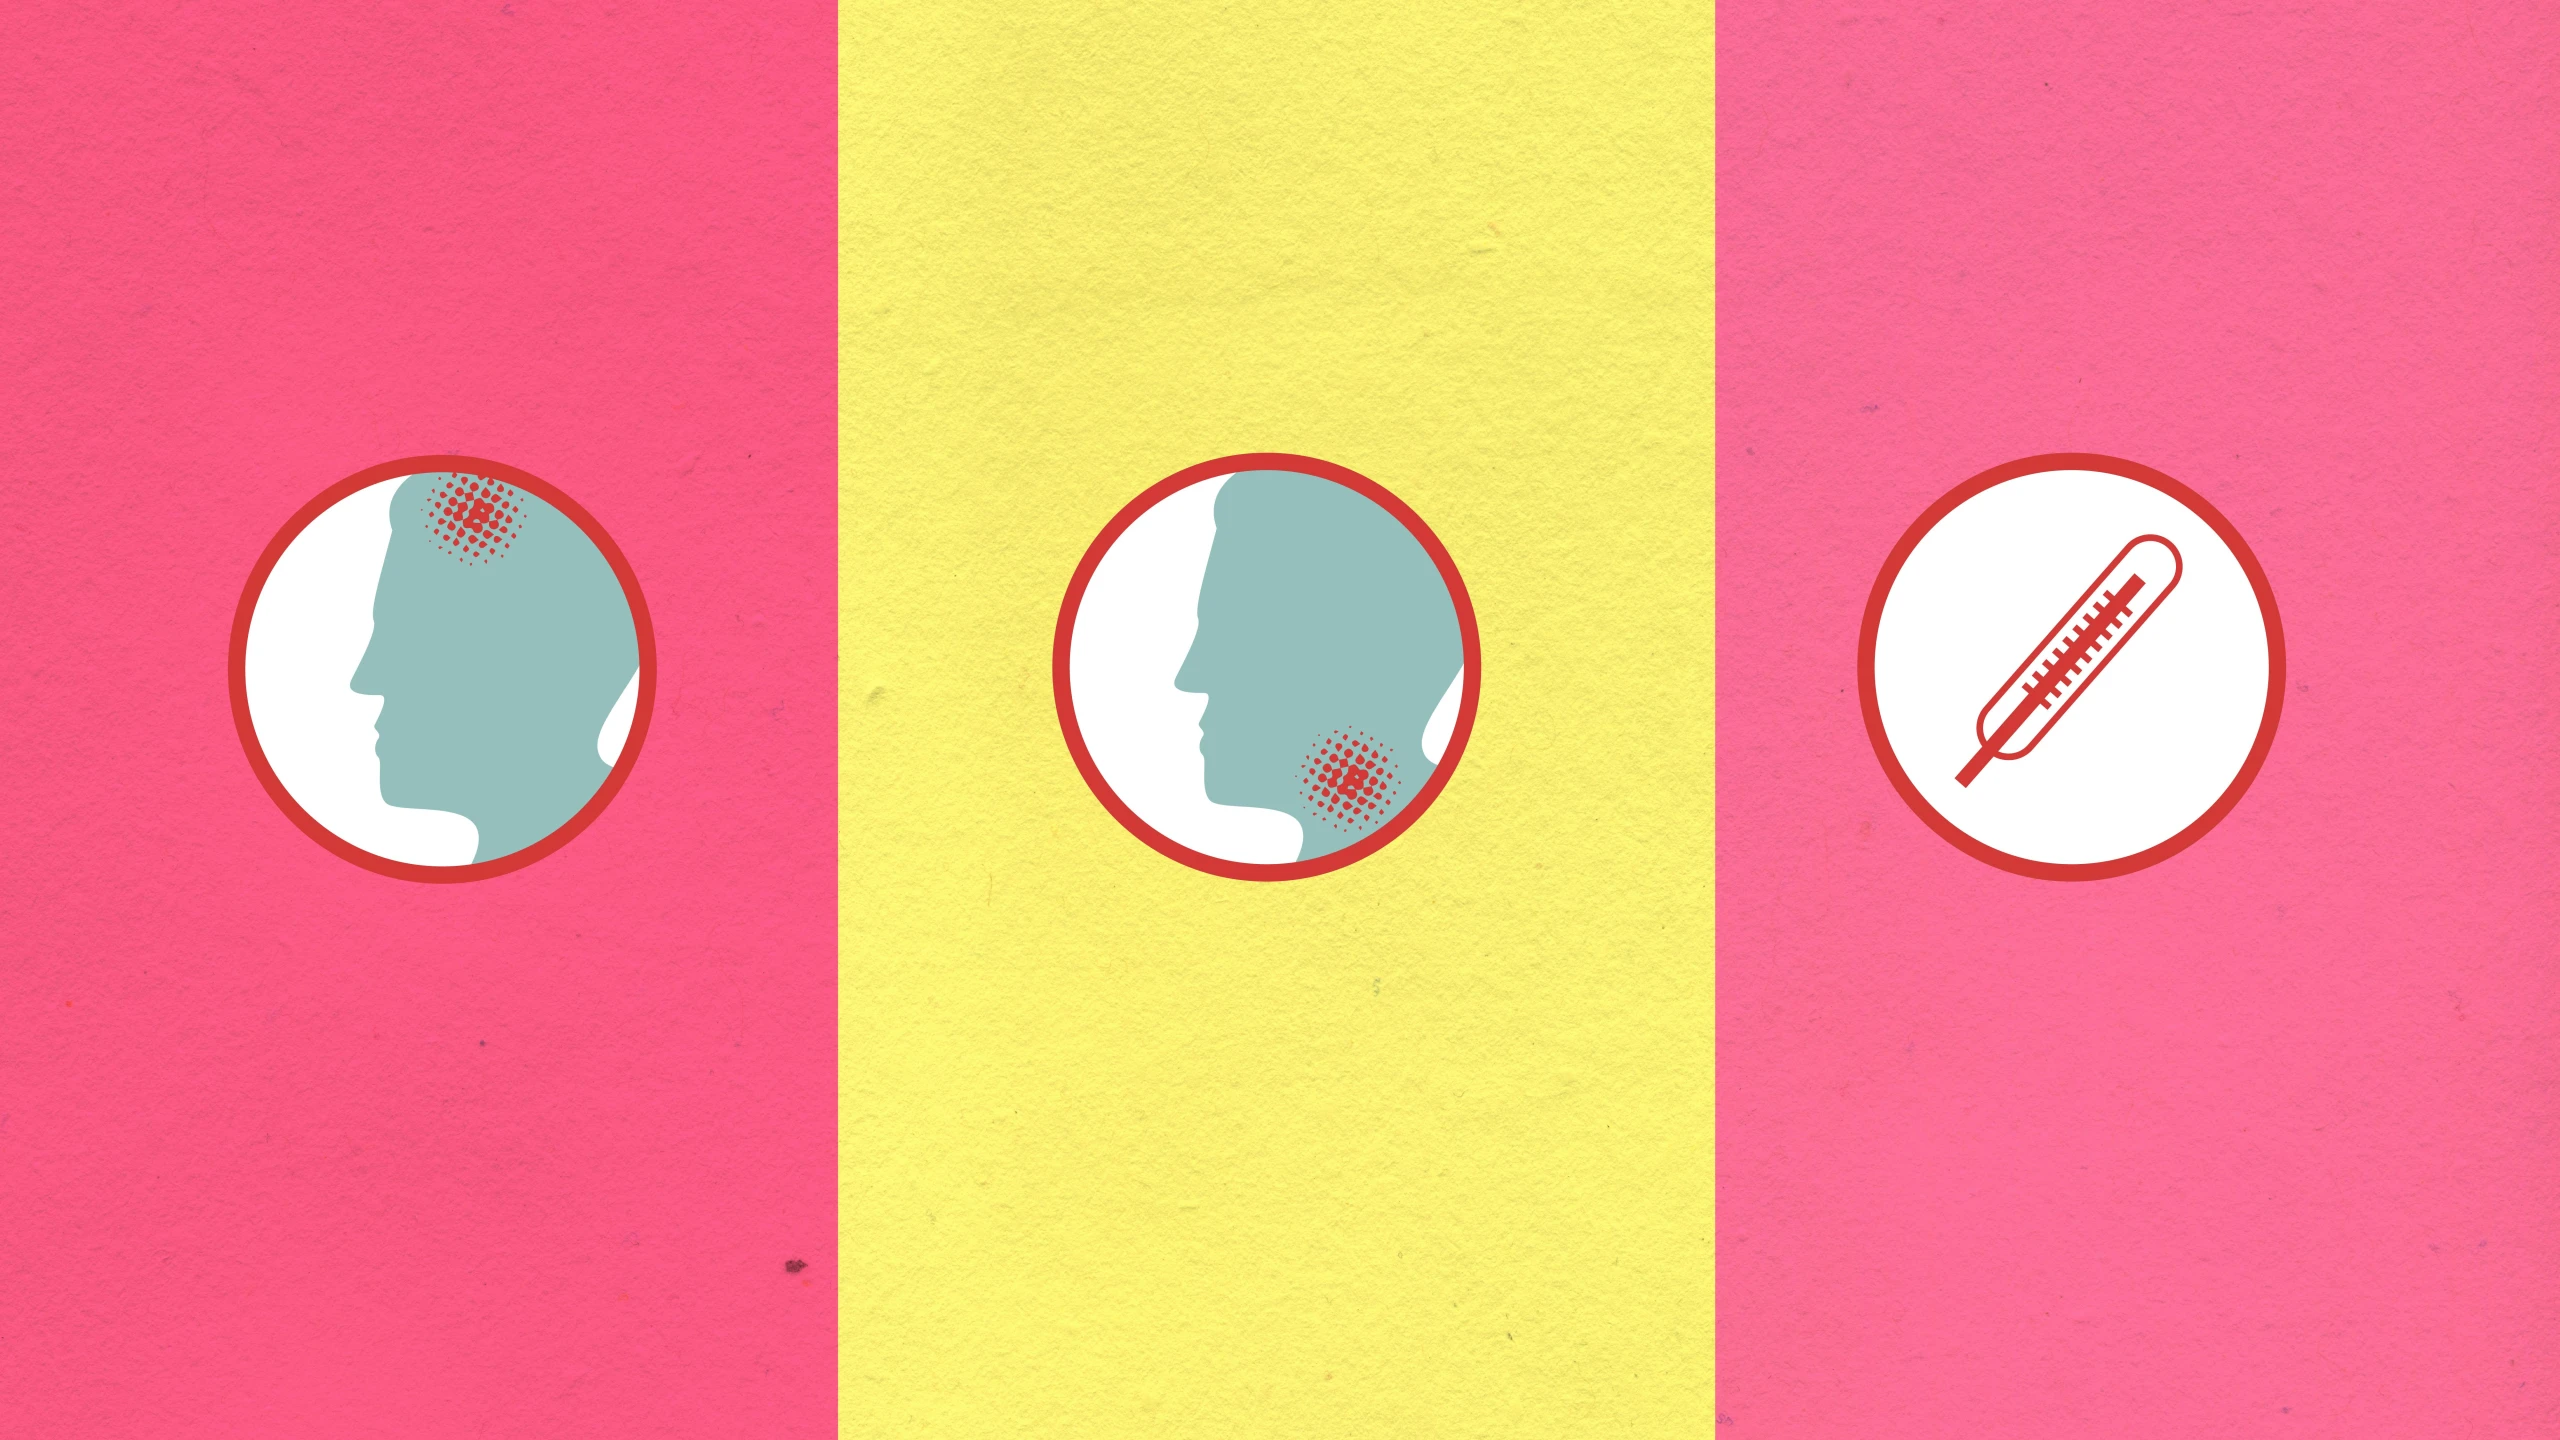 a series of illustrations depicting a man's profile, a man's head, a woman's head, and a man's, digital art, pink and yellow, sores and scars, animation still, 3 colour